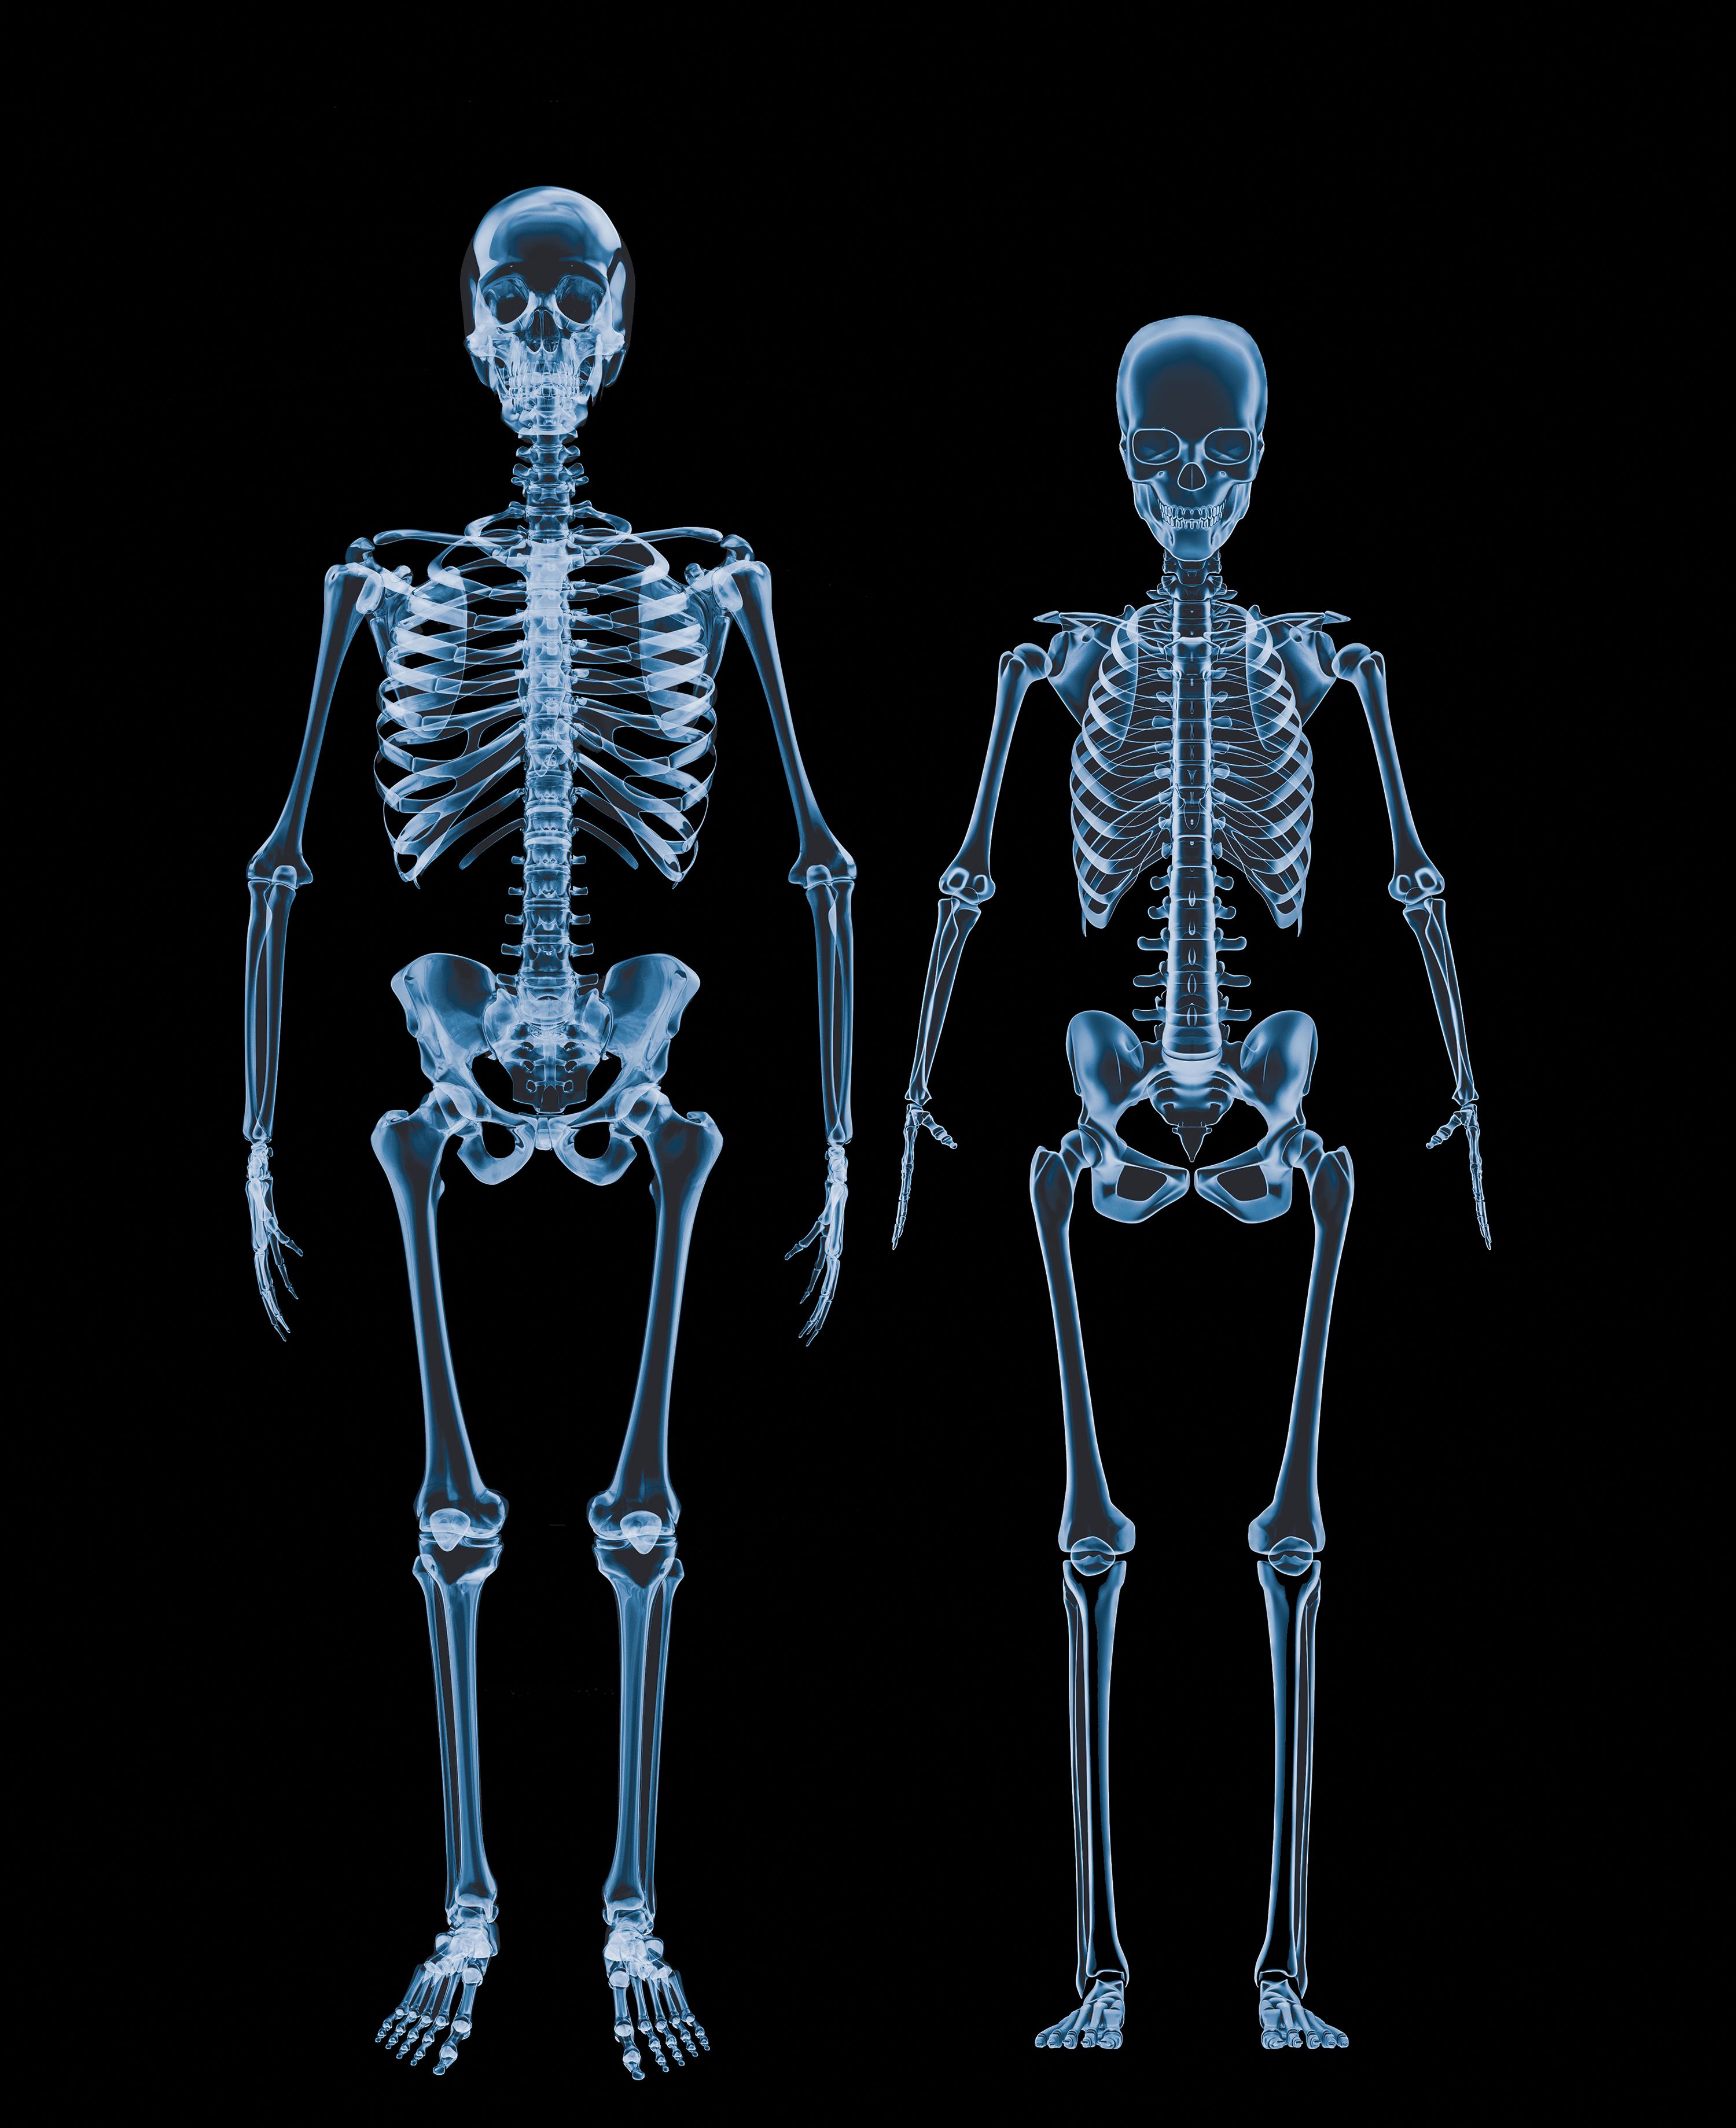 male and female human skeletons